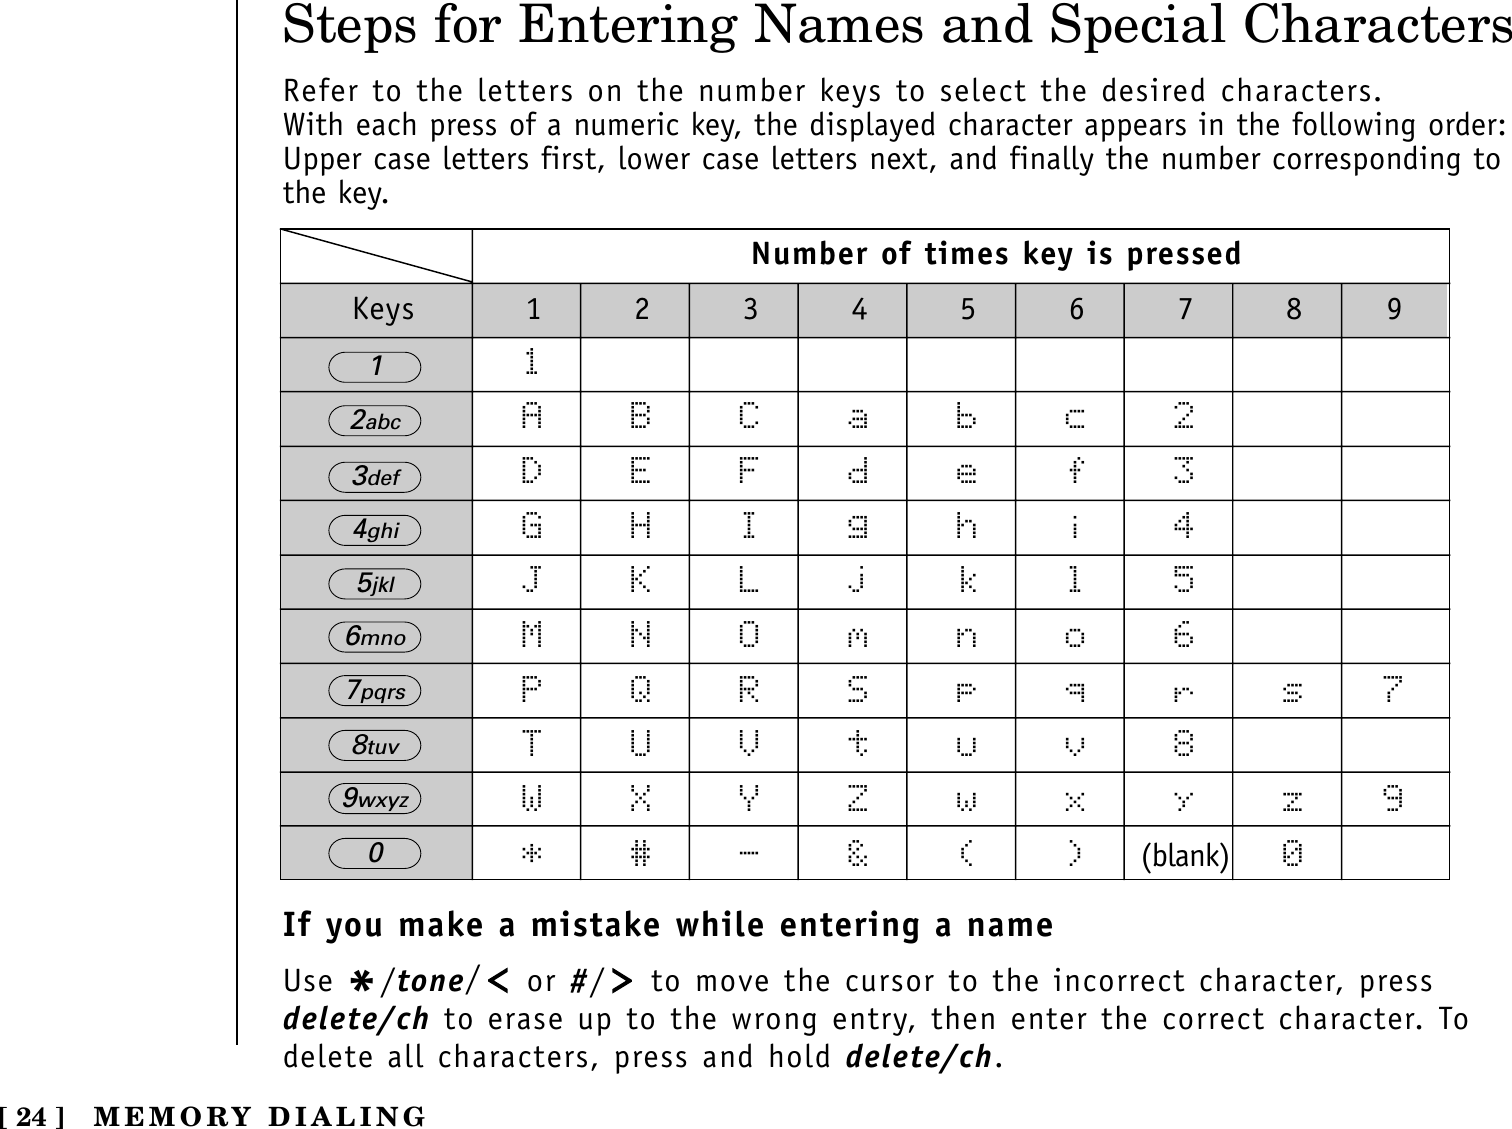 Steps for Entering Names and Special Characters[ 24 ]Refer to the letters on the number keys to select the desired characters.With each press of a numeric key, the displayed character appears in the following order: Upper case letters first, lower case letters next, and finally the number corresponding tothe key.If you make a mistake while entering a nameUse */tone/or #/ to move the cursor to the incorrect character, pressdelete/ch to erase up to the wrong entry, then enter the correct character. Todelete all characters, press and hold delete/ch.MEMORY DIALINGNumber of times key is pressedKeys 1234567891ABCabc2DEFdef3GHIghi4JKLjkl5MNOmno6PQRSpqrs7TUVtuv8WXYZwxyz9*#-&amp;()(blank) 012abc3def4ghi5jkl6mno7pqrs8tuv9wxyz0